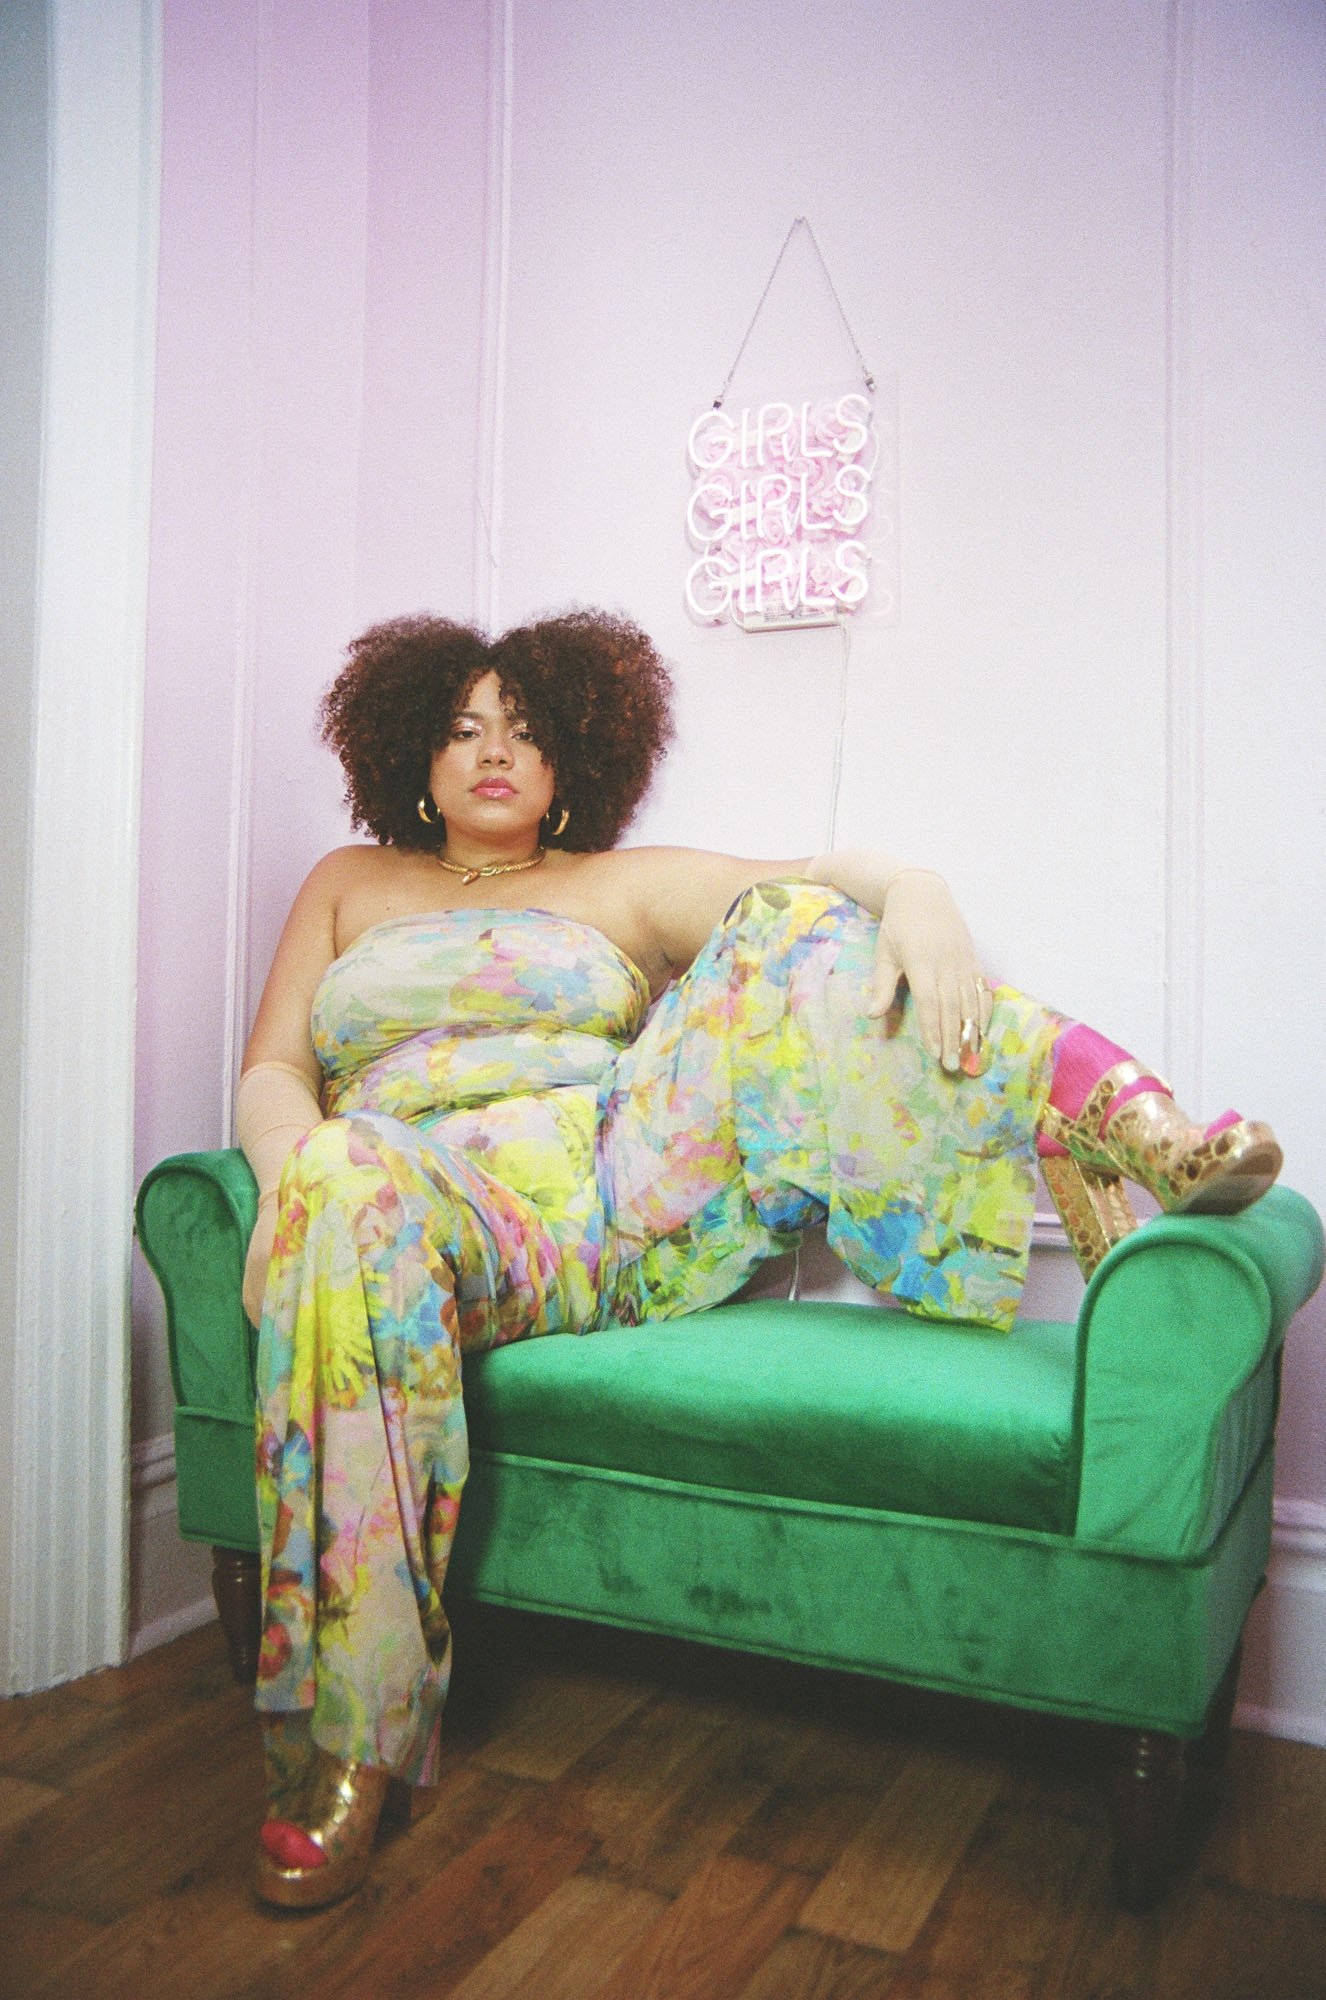  Editorial Photoshoot Styled by Charlotte Sims —&nbsp;A woman sitting on a couch posing wearing fashionable clothes. 